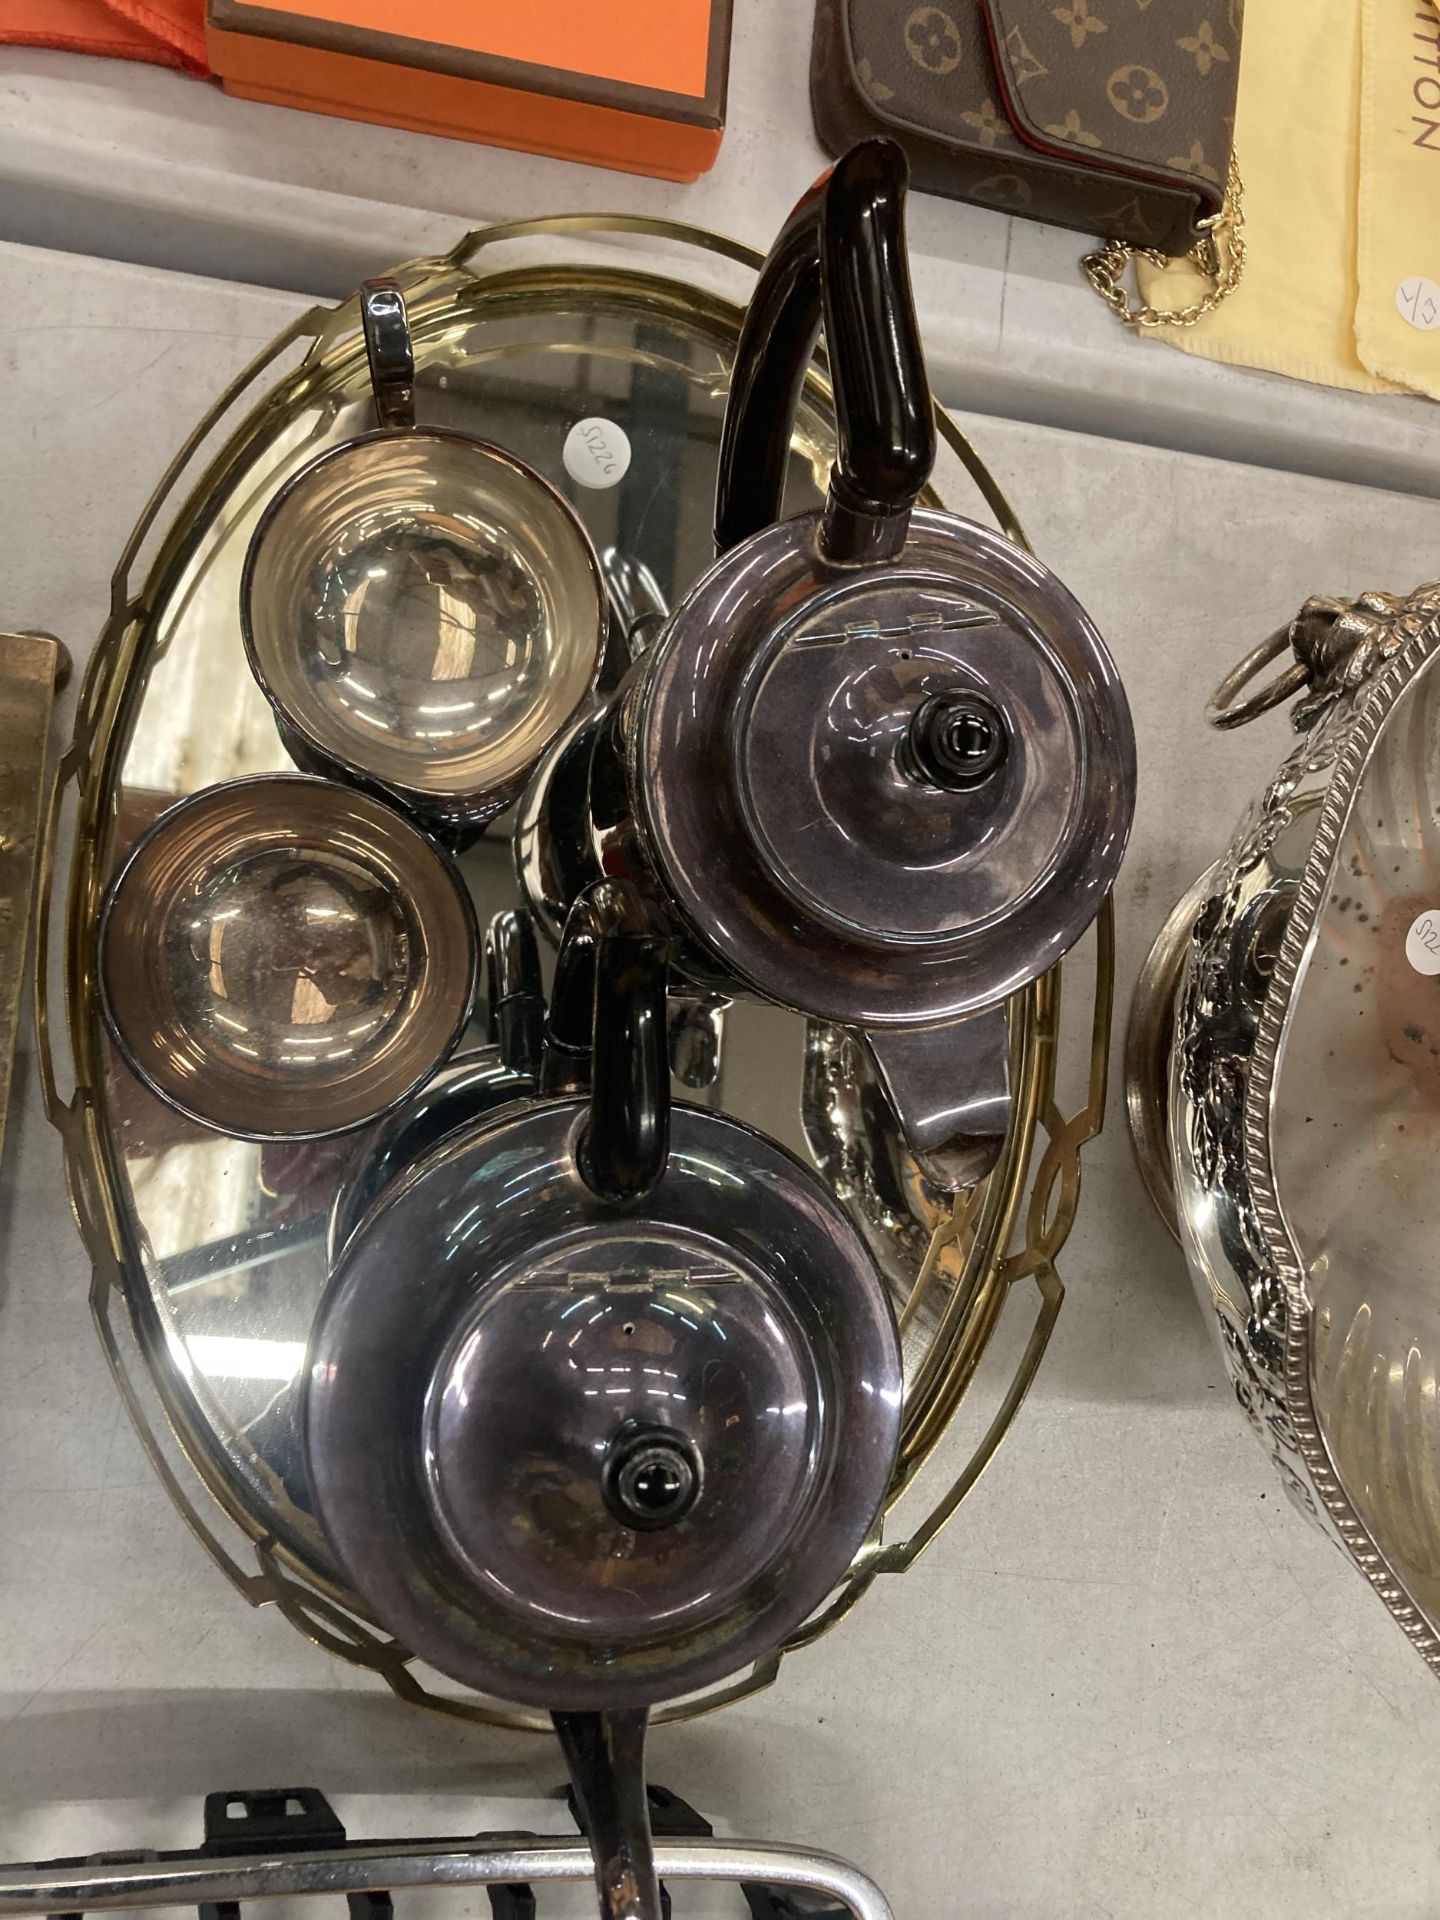 A COLLECTION OF SILVER PLATED ITEMS - PUNCH BOWL, TEA SET ON STAND ETC - Image 5 of 6